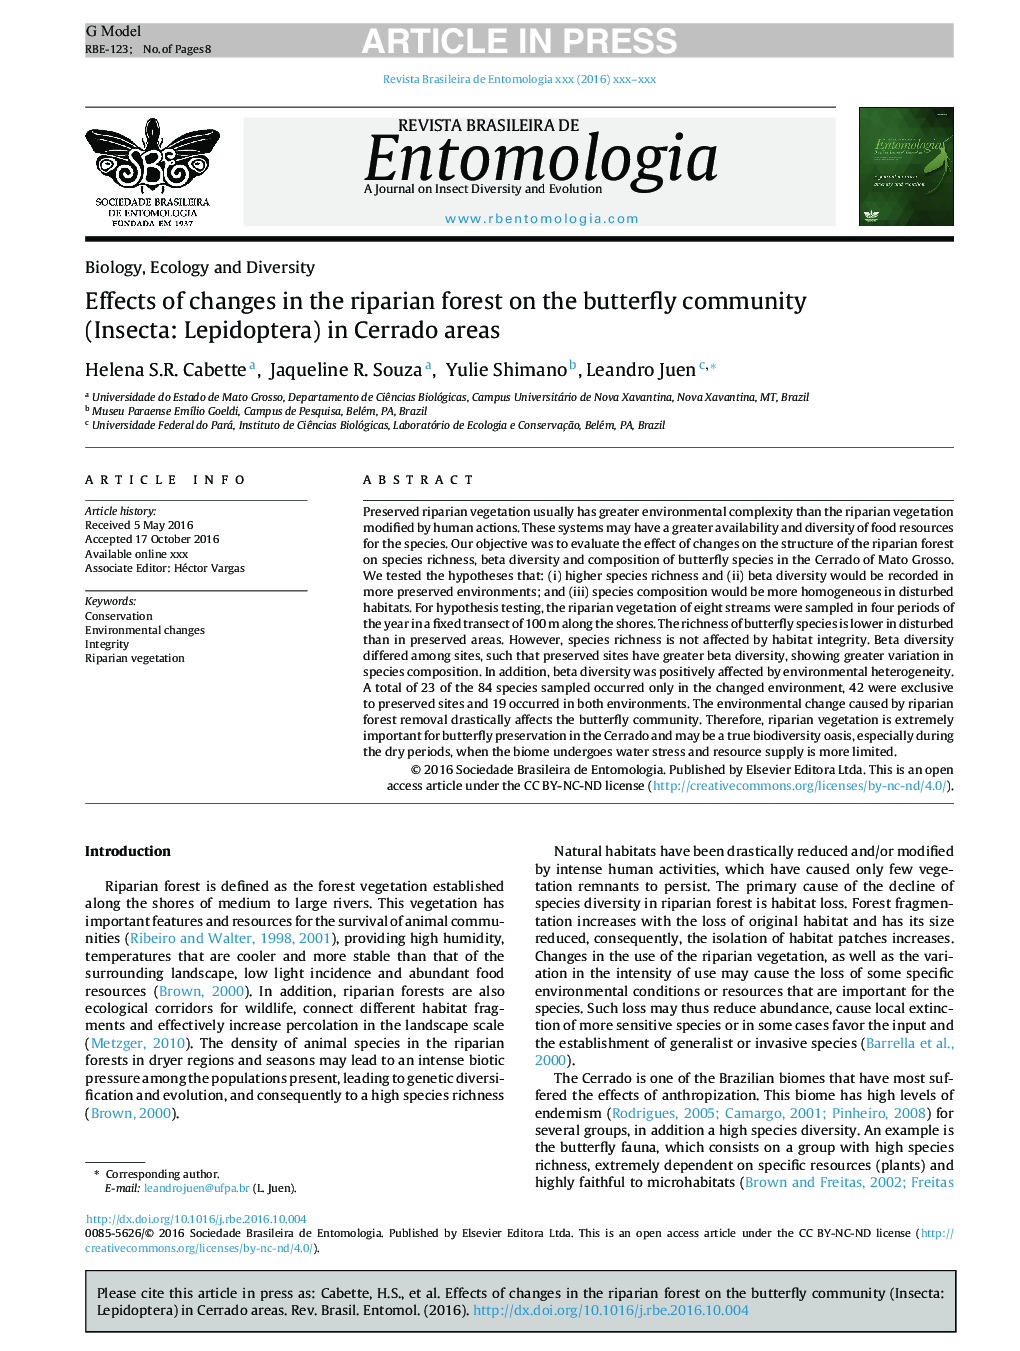 Effects of changes in the riparian forest on the butterfly community (Insecta: Lepidoptera) in Cerrado areas